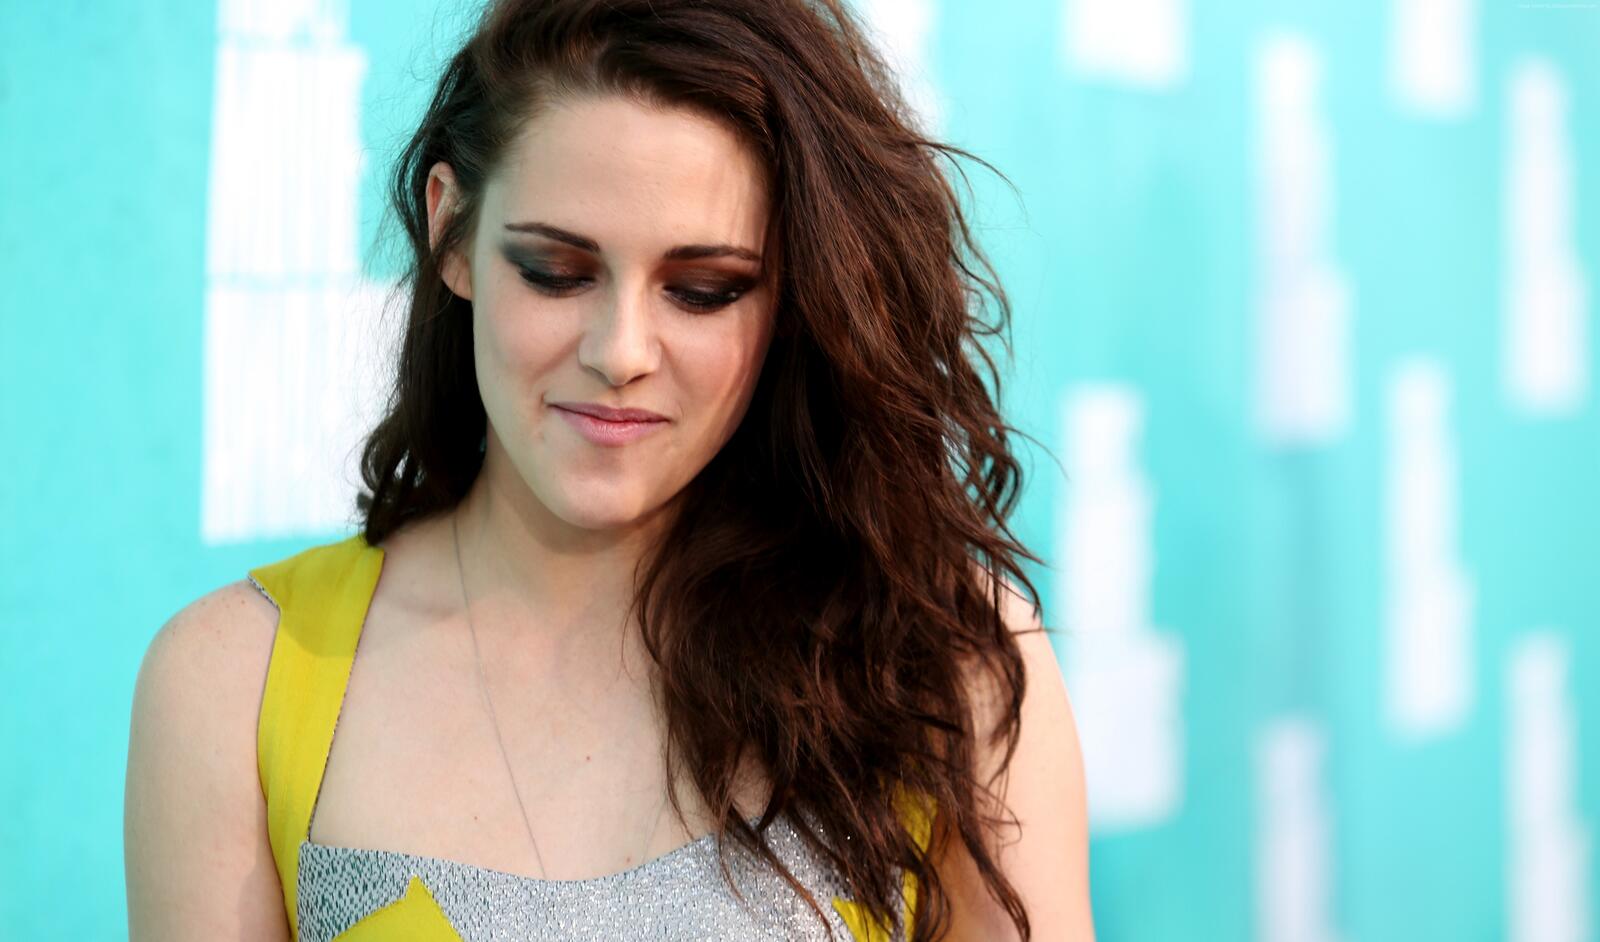 Free photo Beautiful pictures of Kristen Stewart, celebrities, girls for free